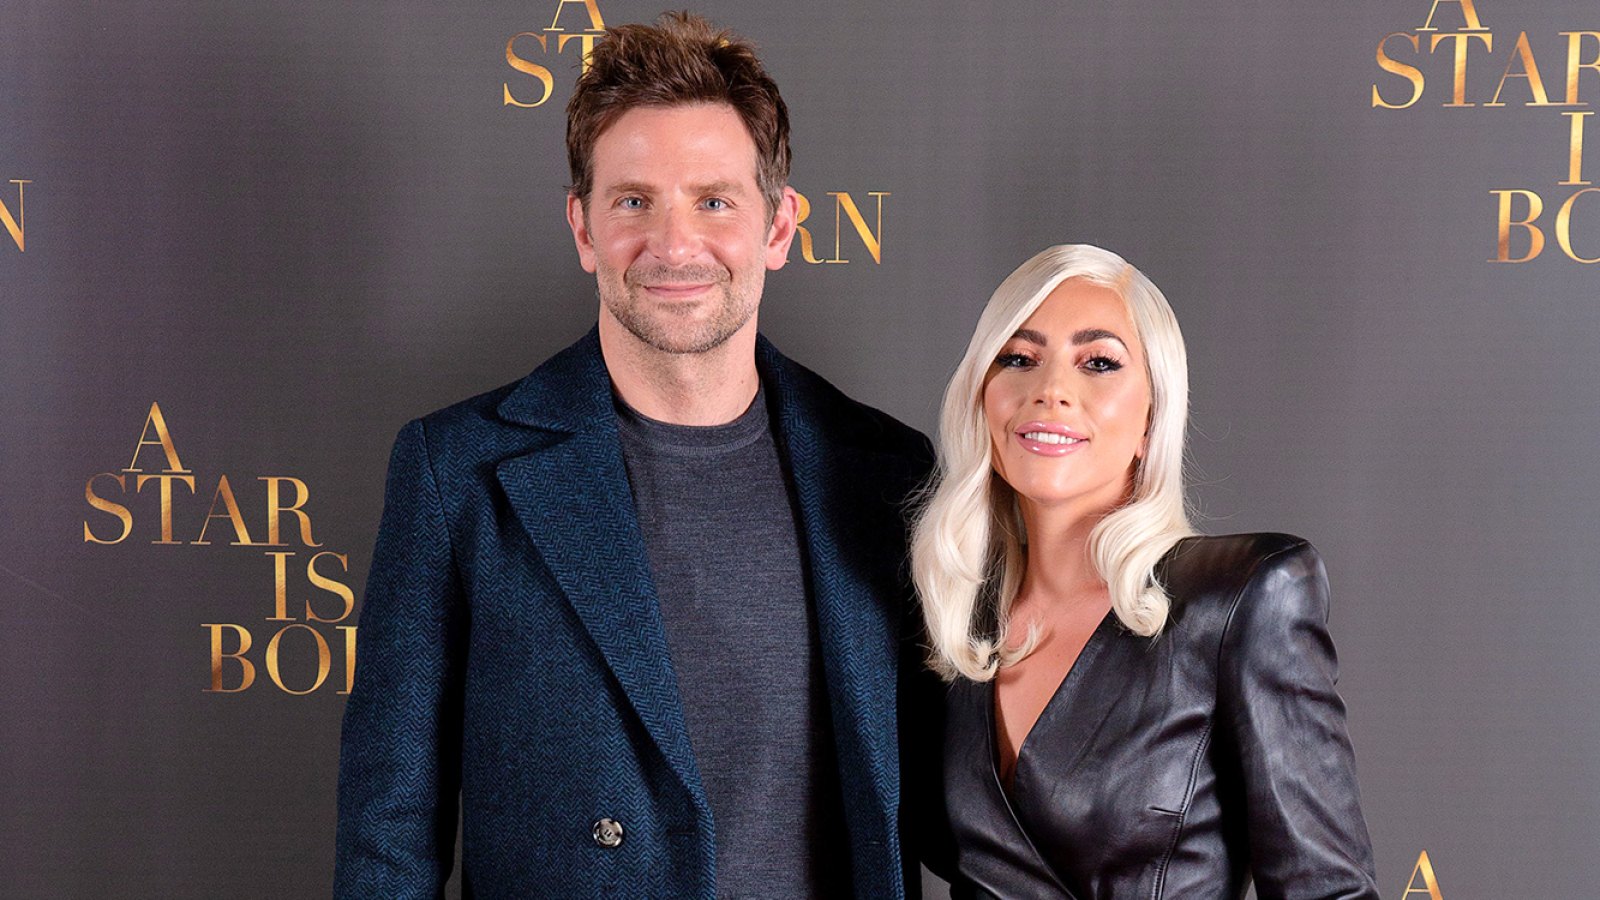 Bradley Cooper Confirms Steamy Lady Gaga Oscars Duet Was Just a Performance